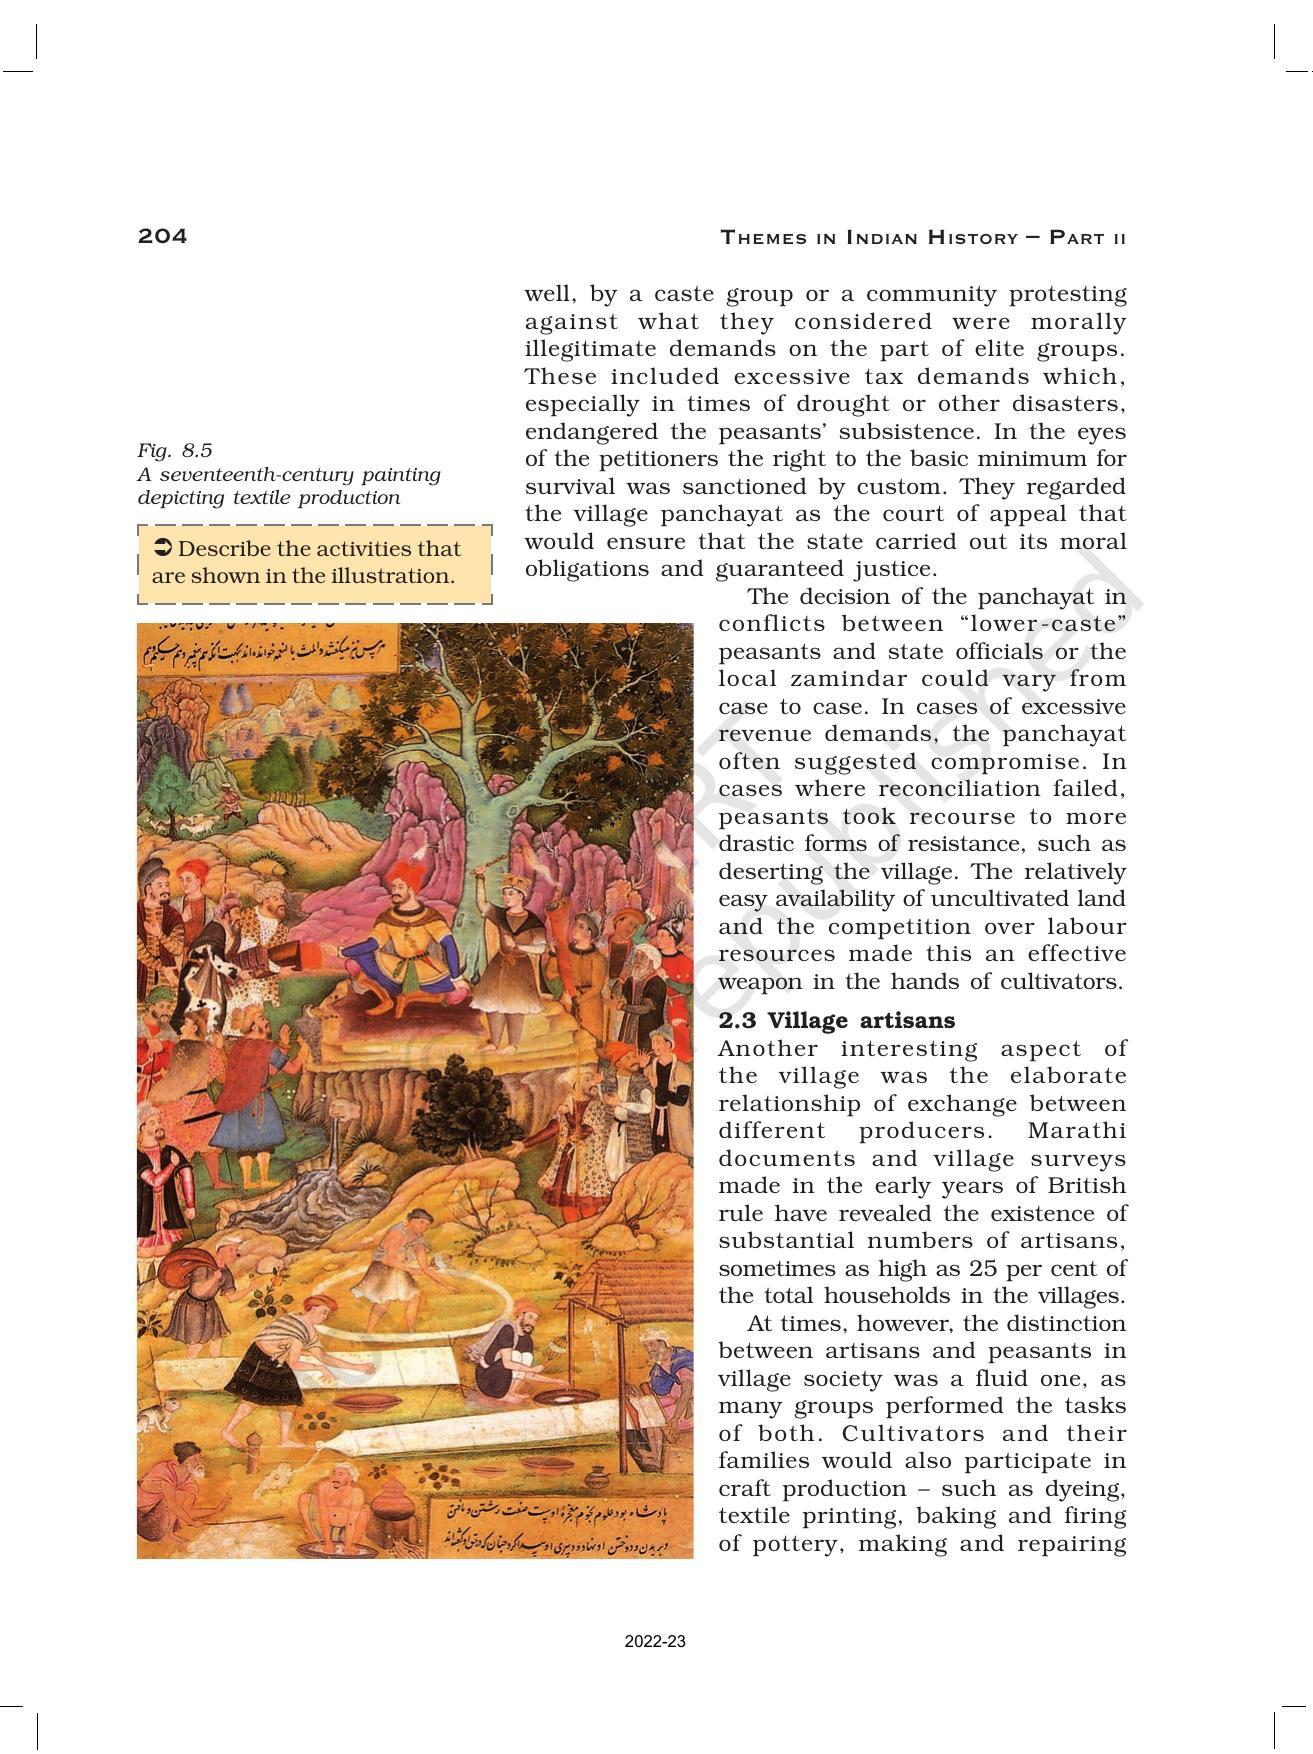 NCERT Book for Class 12 History (Part-II) Chapter 8 Peasants, Zamindars, and the State - Page 9